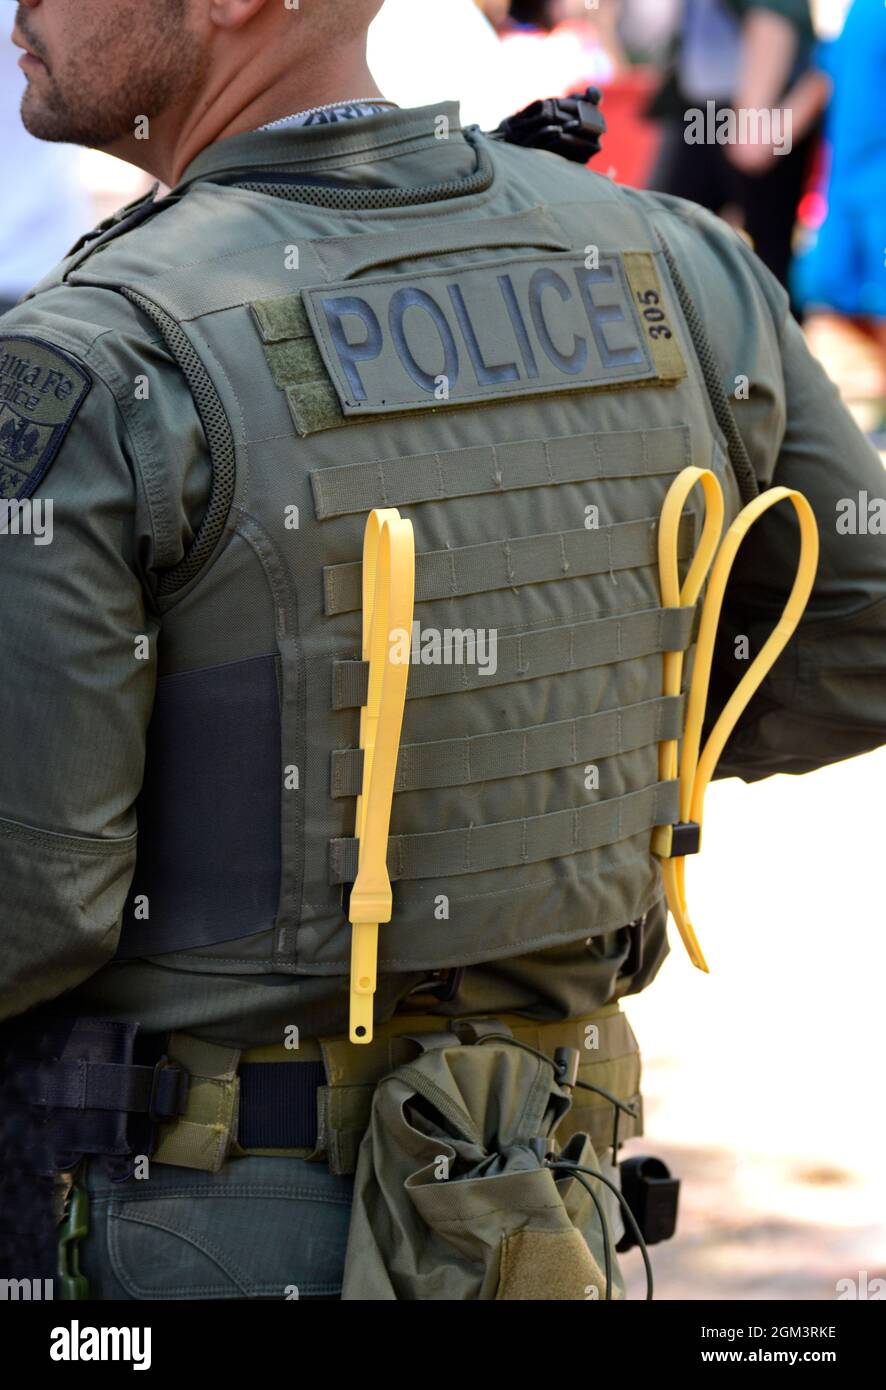 A members of the Santa Fe, New Mexico Police Department's SWAT team stands with plastic zip-tie handcuffs attached to his vest. Stock Photo